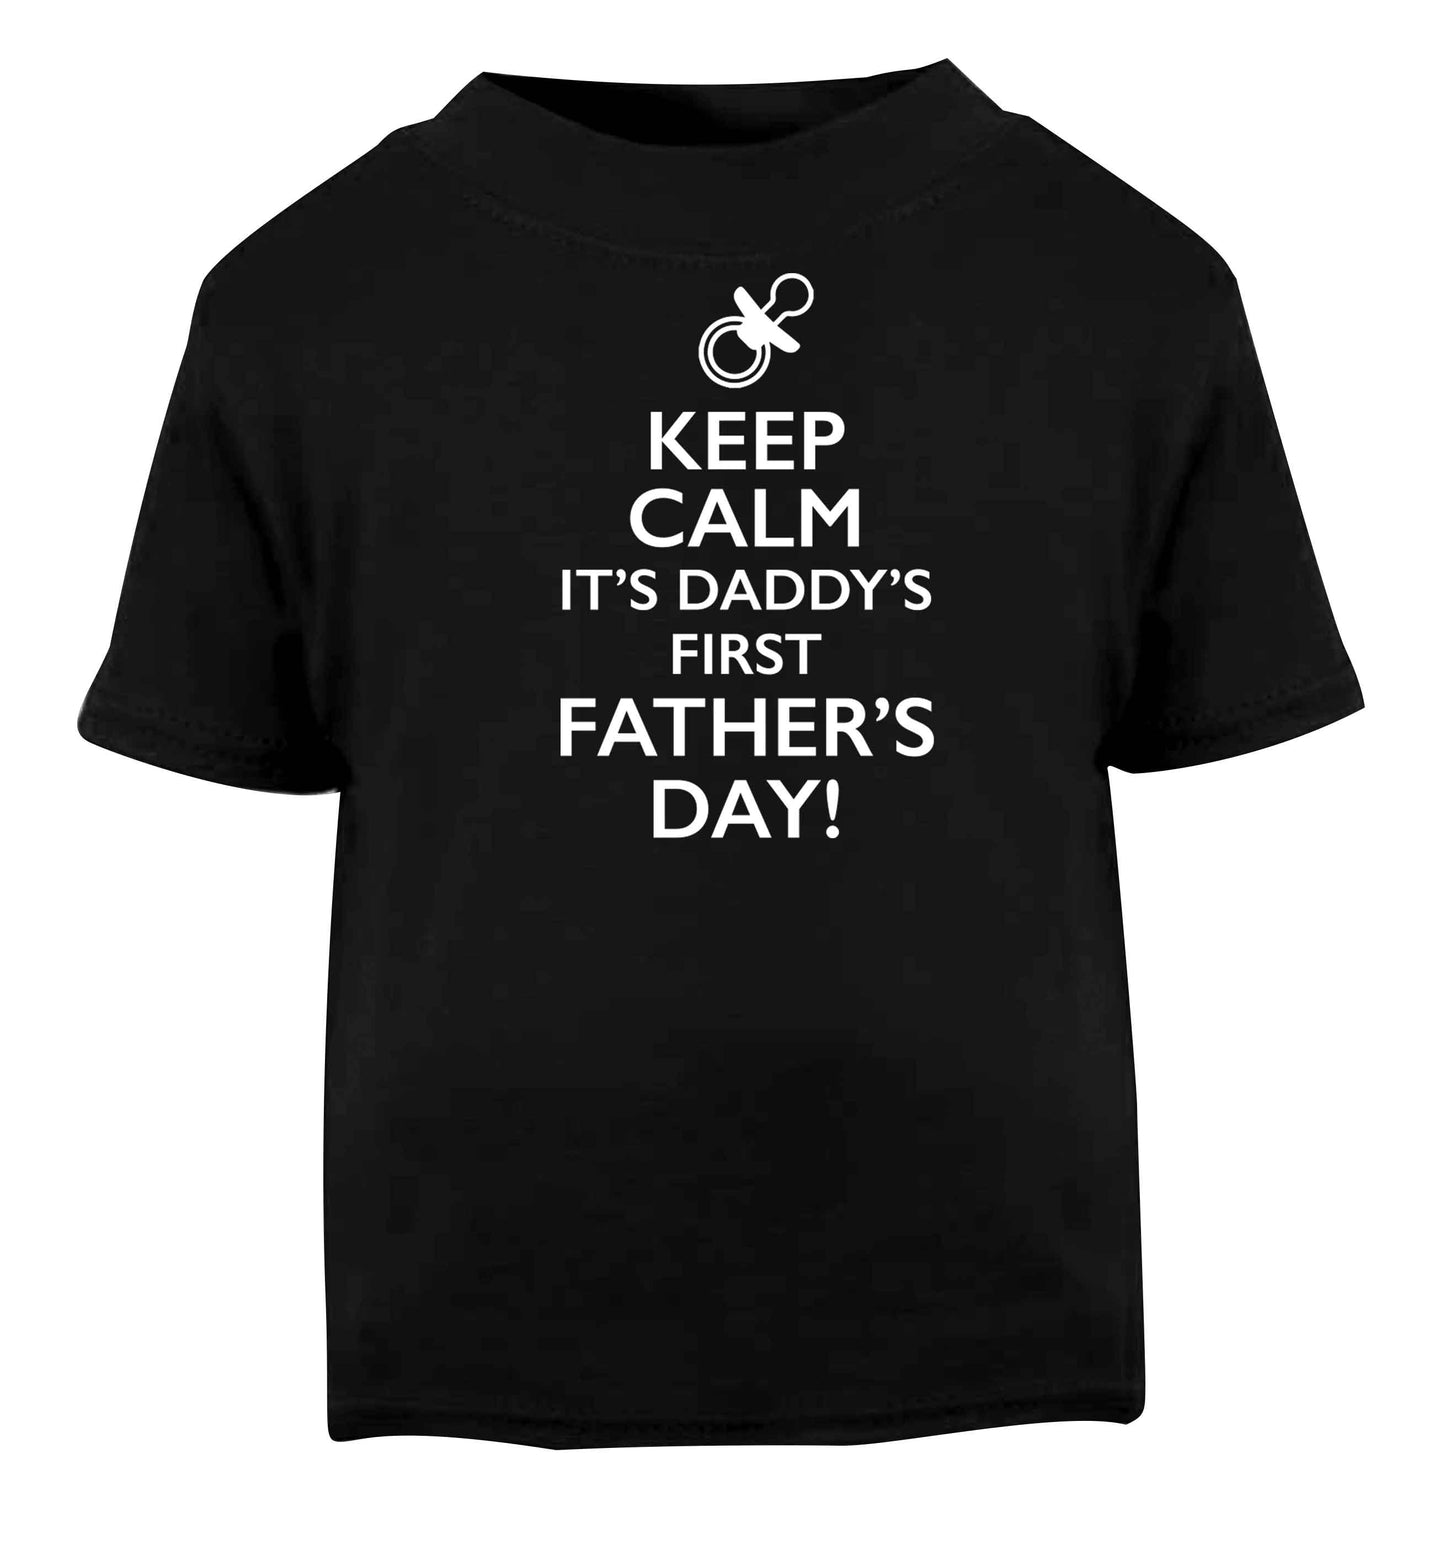 Keep calm it's daddys first father's day Black baby toddler Tshirt 2 years